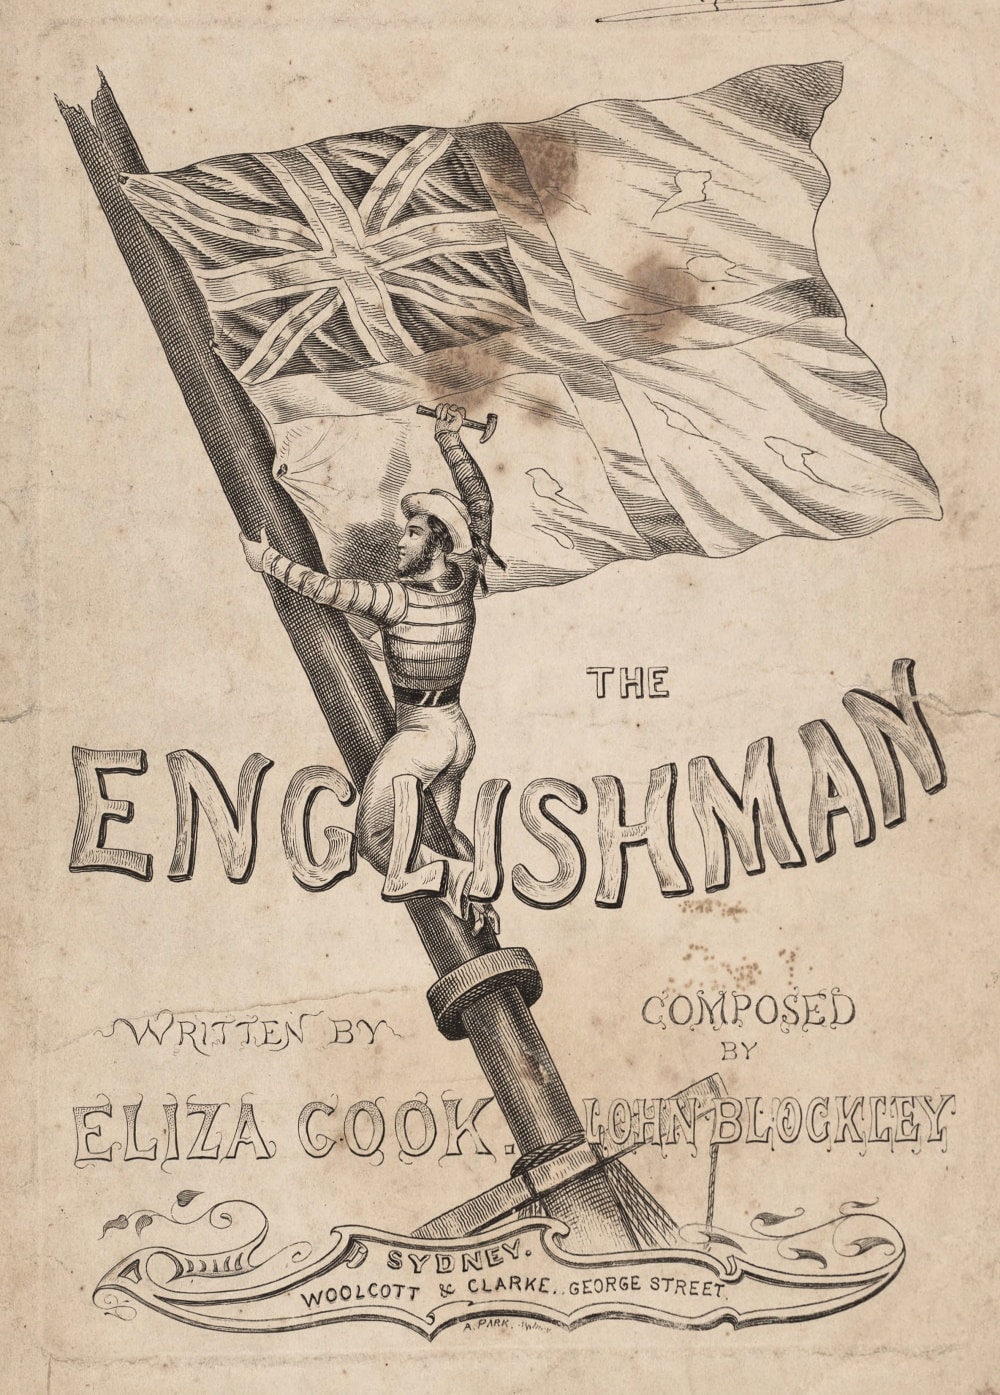 Archibald Park's cover for The Englishman (Sydney: Woolcott and Clarke, c. 1855)